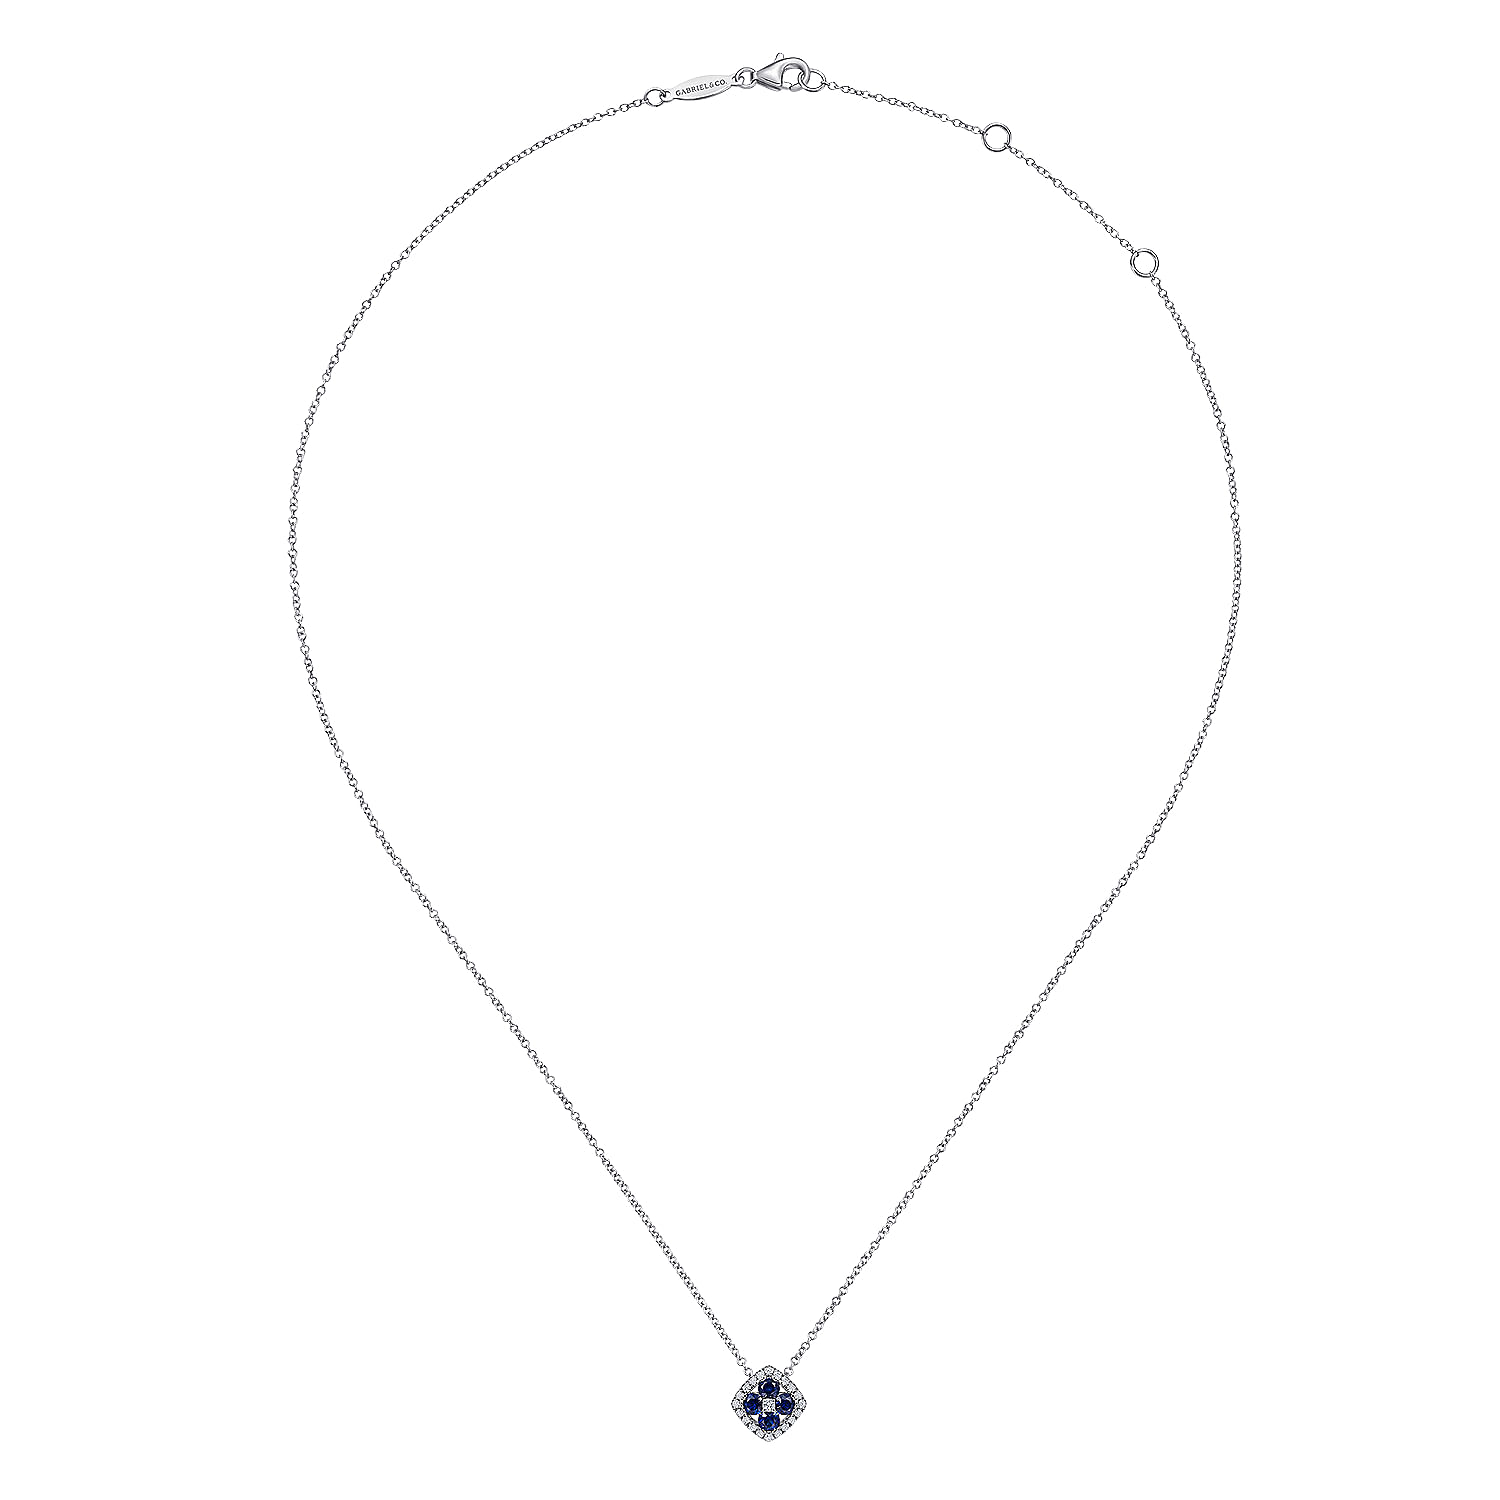 14K White Gold Sapphire and Diamond Halo Floral Pendant Necklace